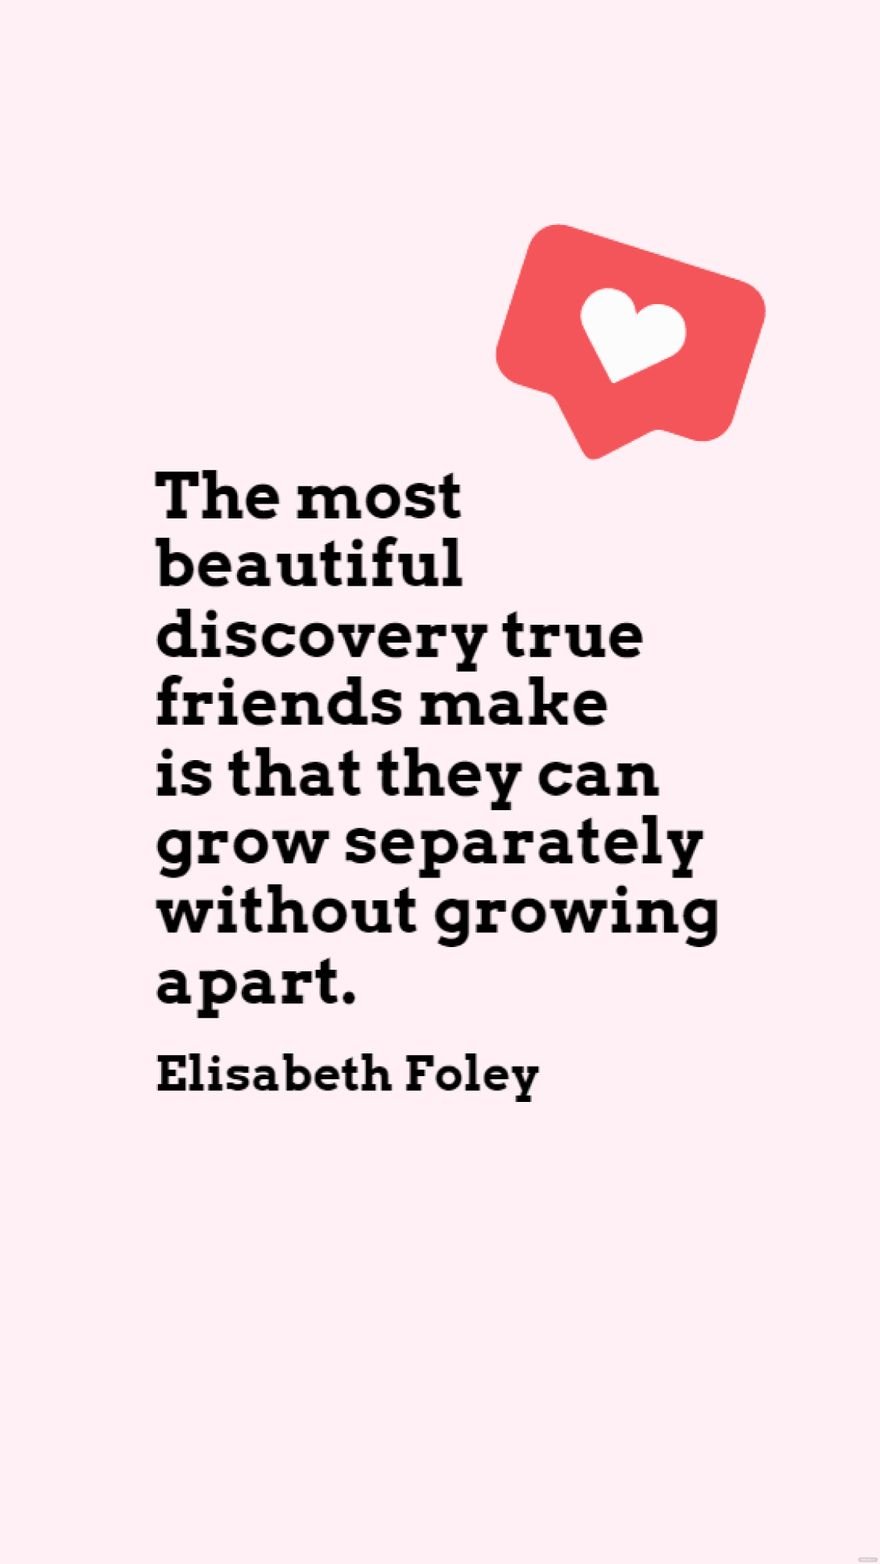 Free Elisabeth Foley - The most beautiful discovery true friends make is that they can grow separately without growing apart. in JPG